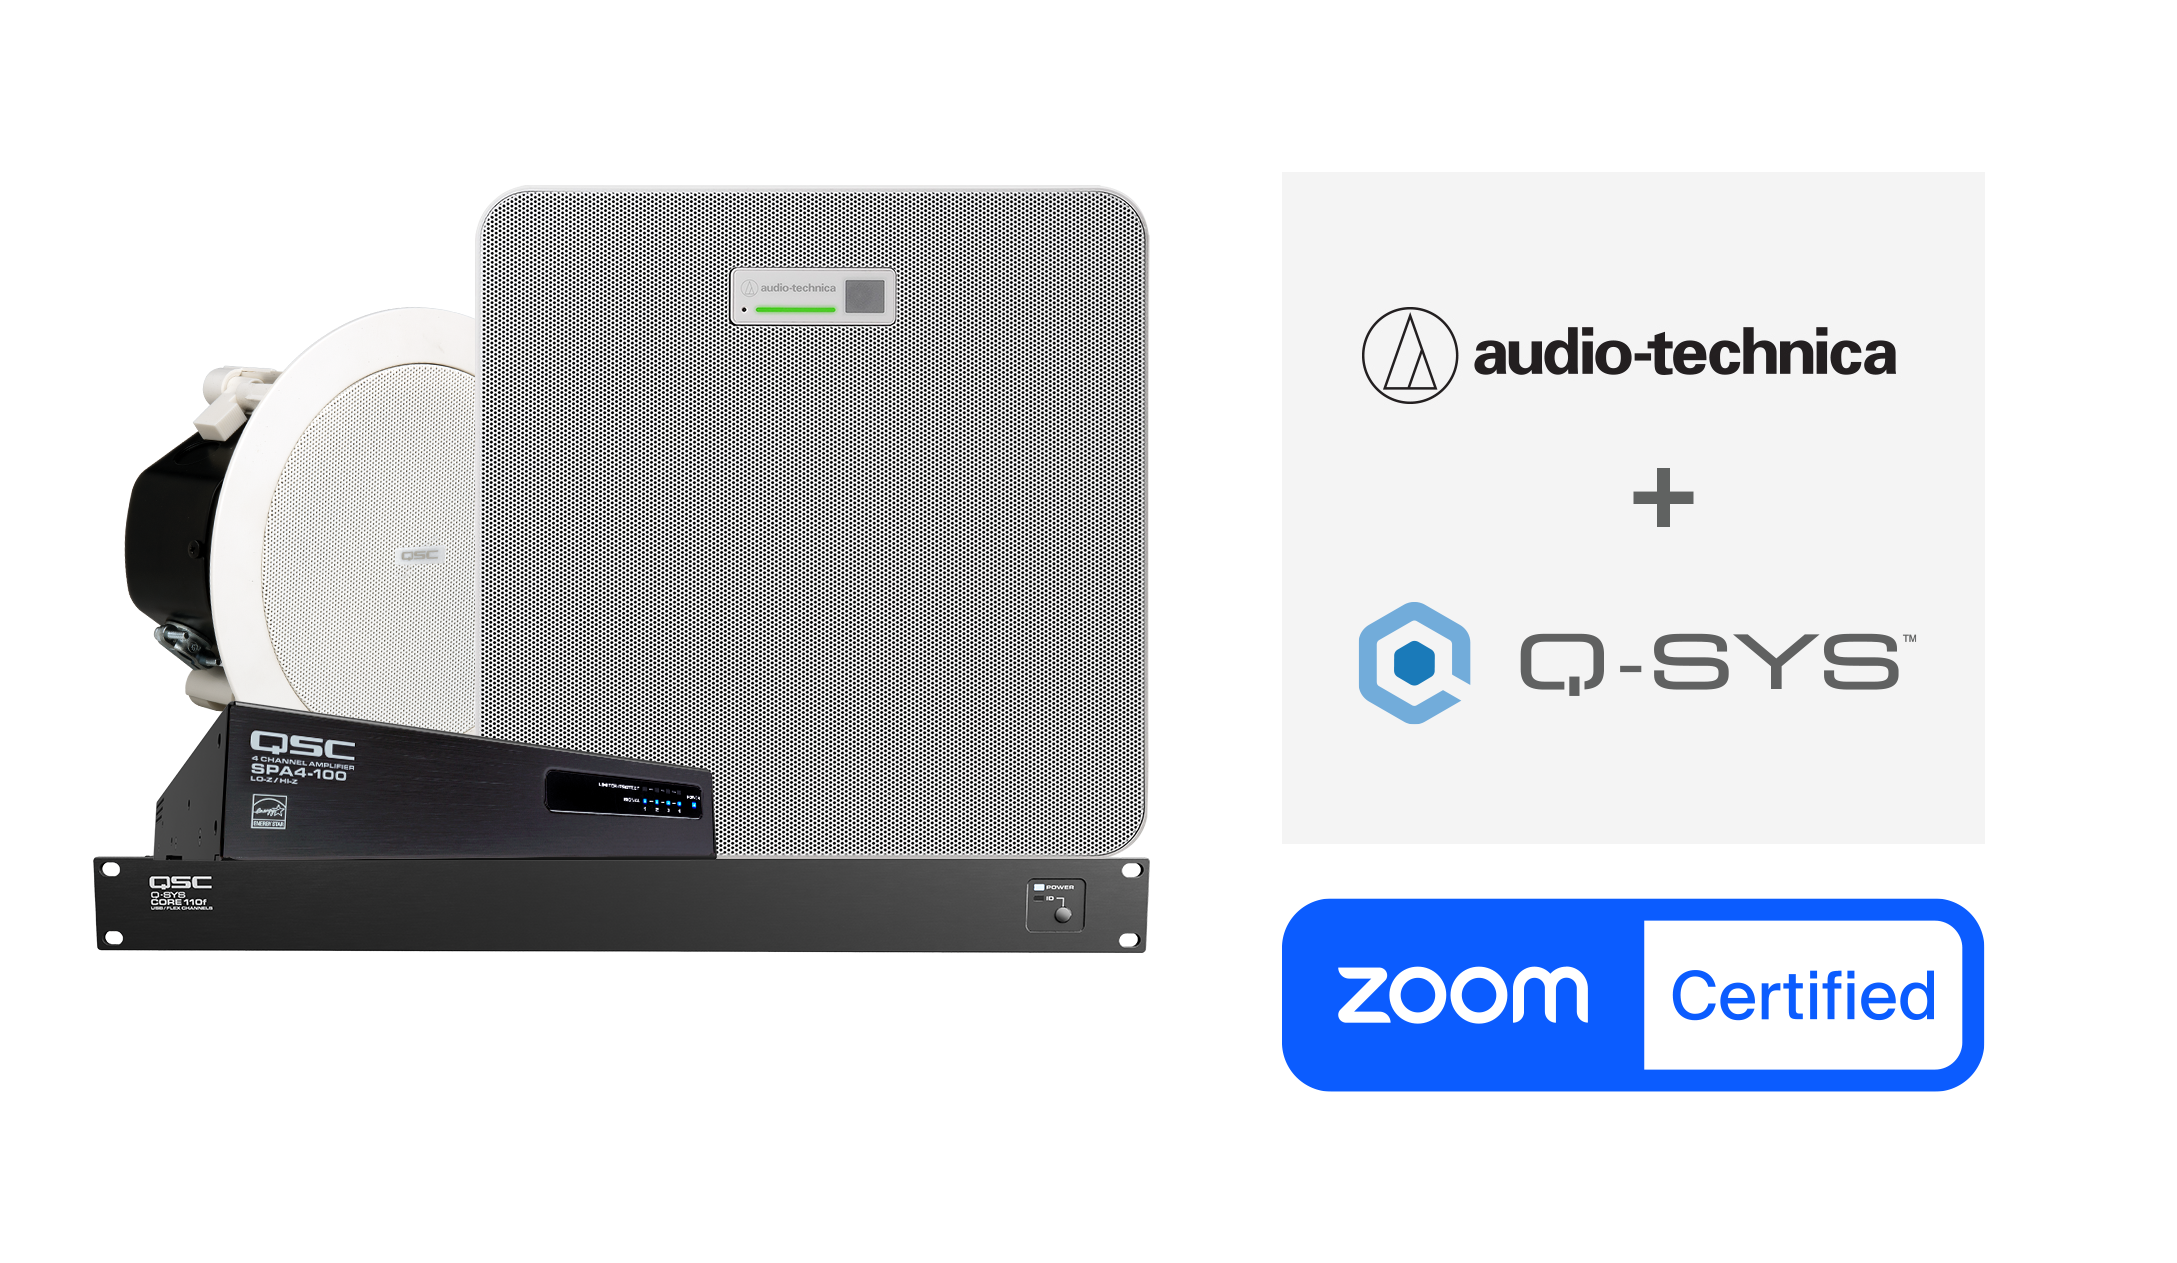 Audio-Technica ATND1061DAN Ceiling Array combined with Q-SYS System earns Zoom Rooms Certification